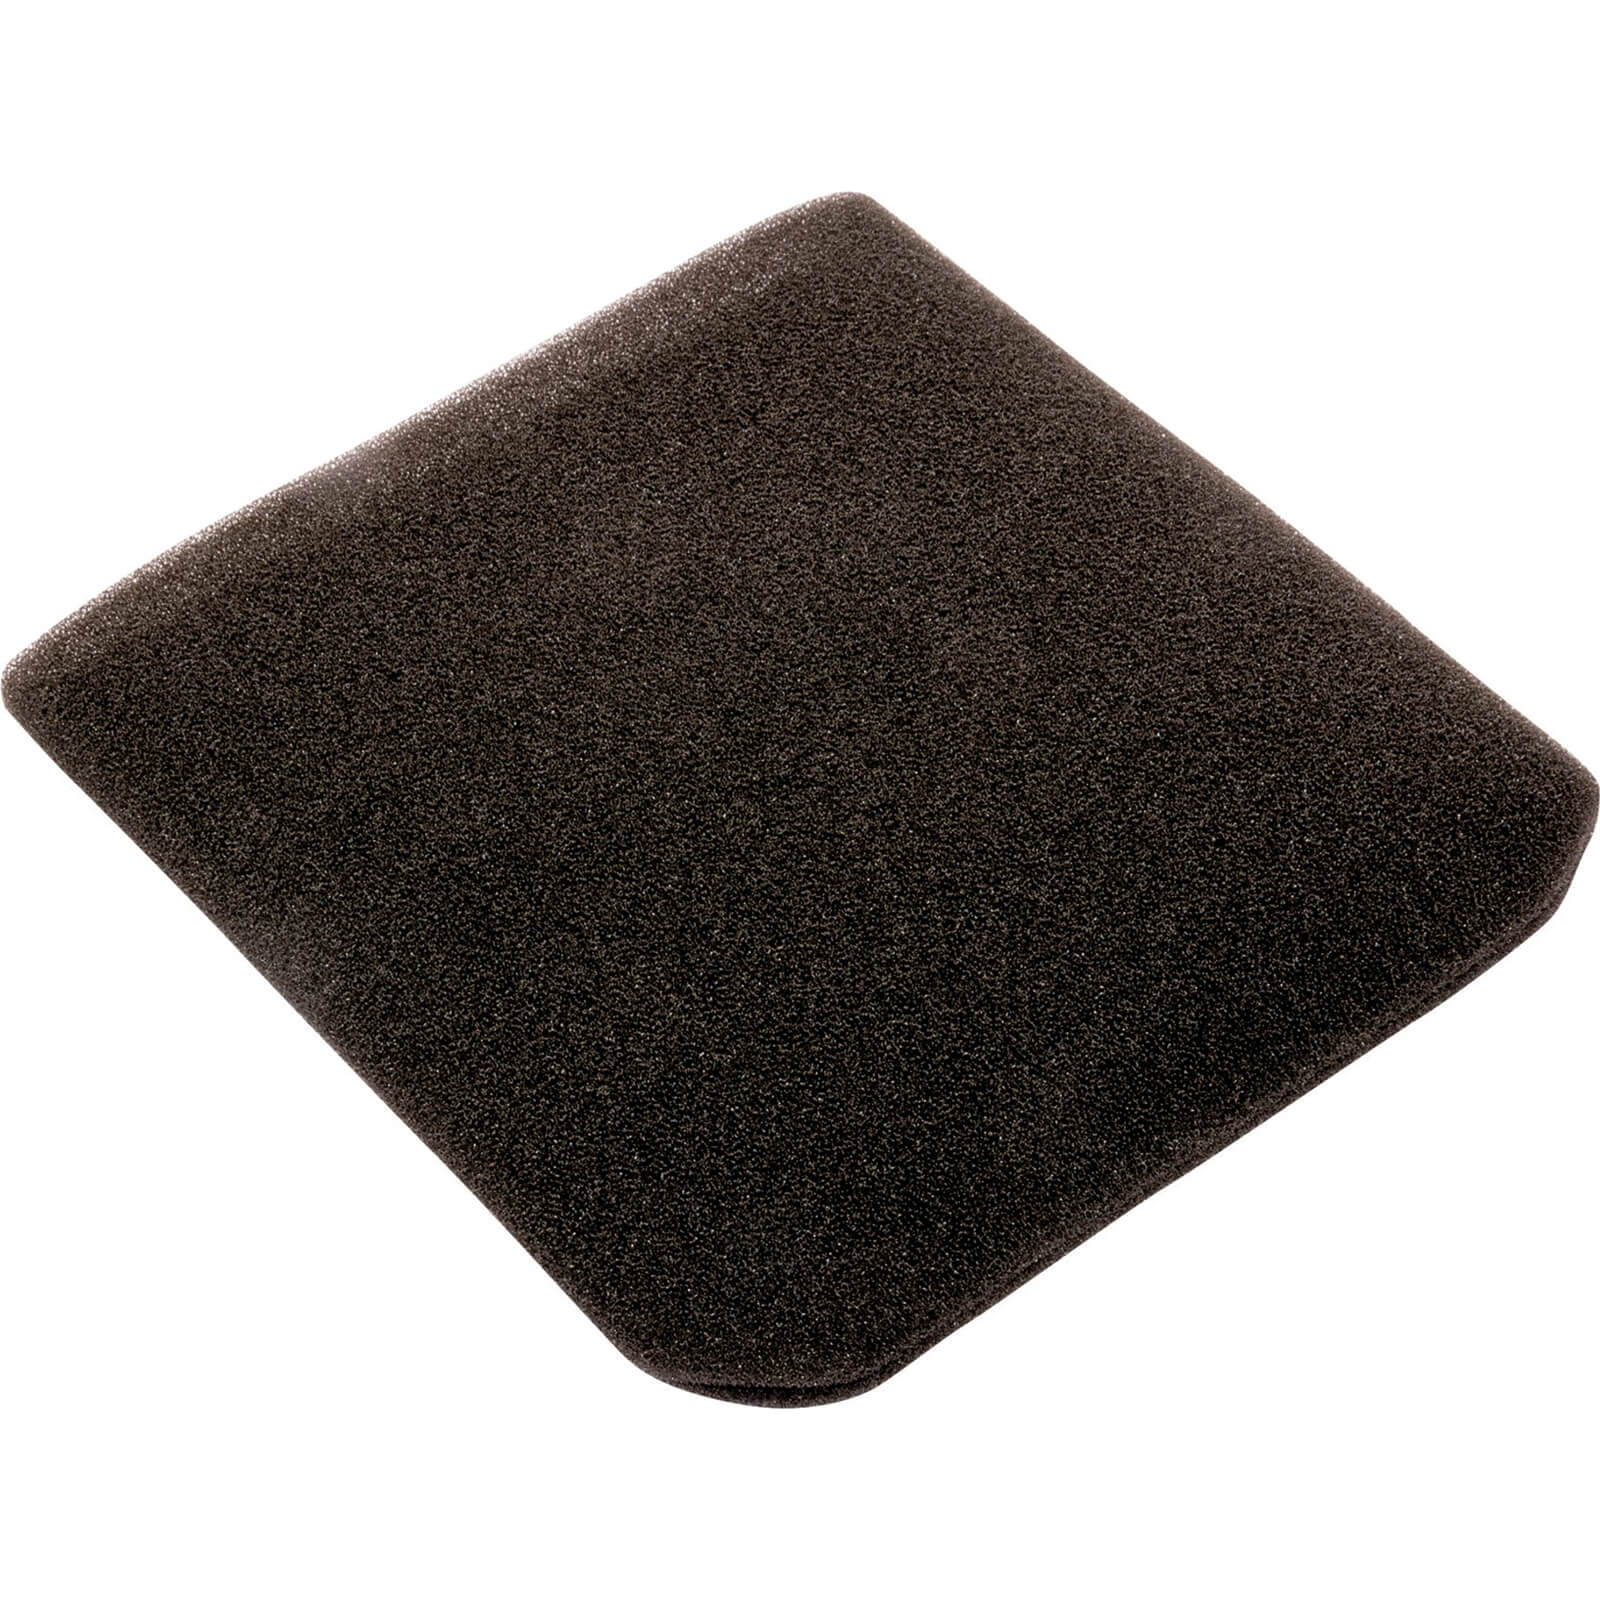 Photos - Other household chemicals Draper Anti Foam Filter for 53006 Wet and Dry Vacuum Cleaner AVC121 